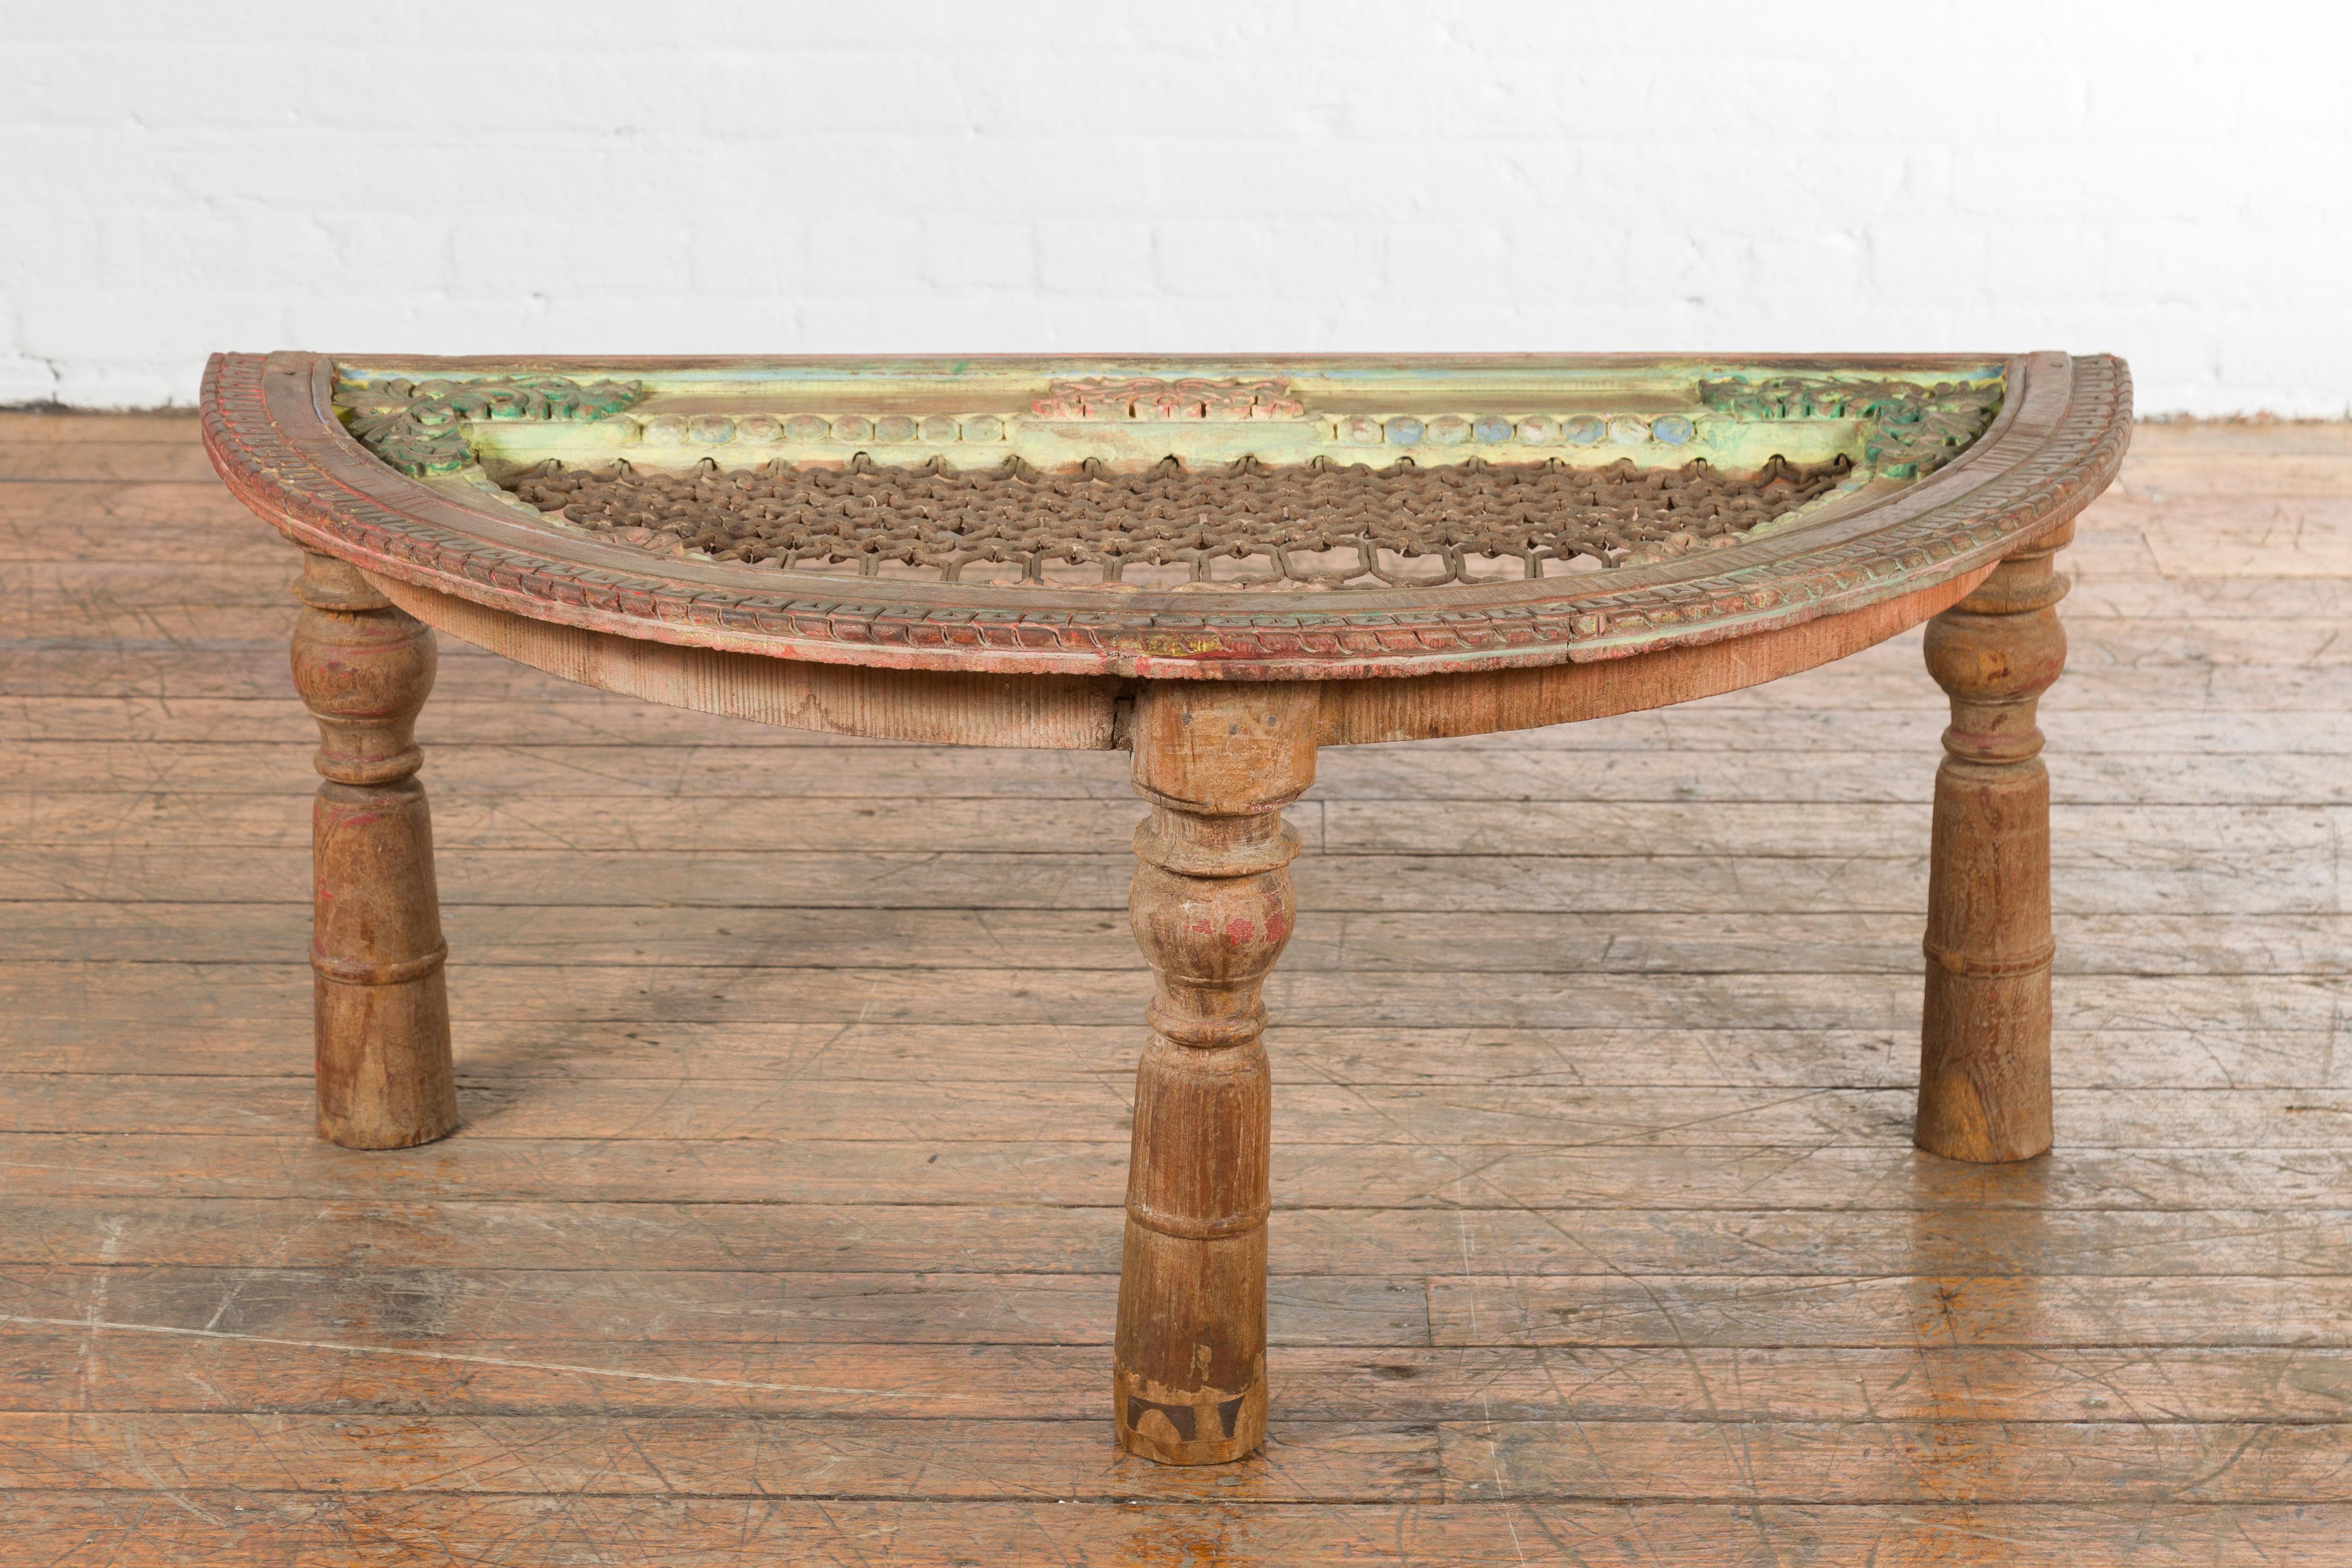 Indian 19th Century Sheesham Wood Low Demilune Table with Window Grate Iron Top For Sale 9